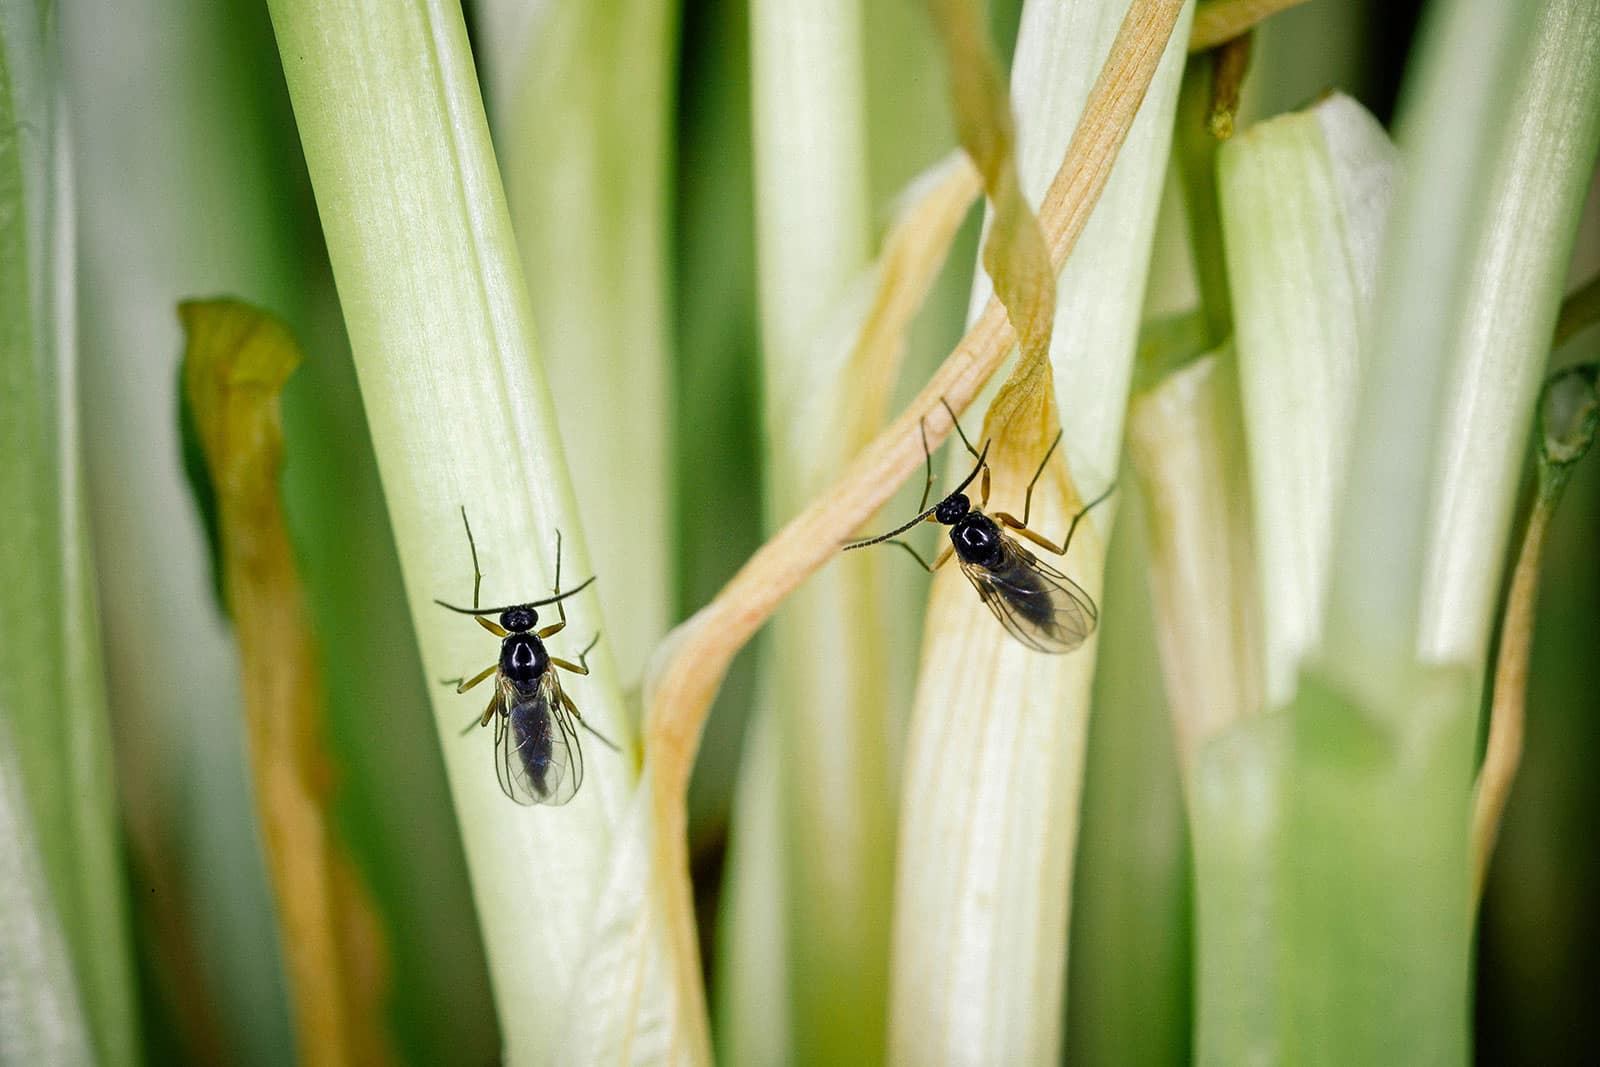 Close-up of two gnats on green plant stems